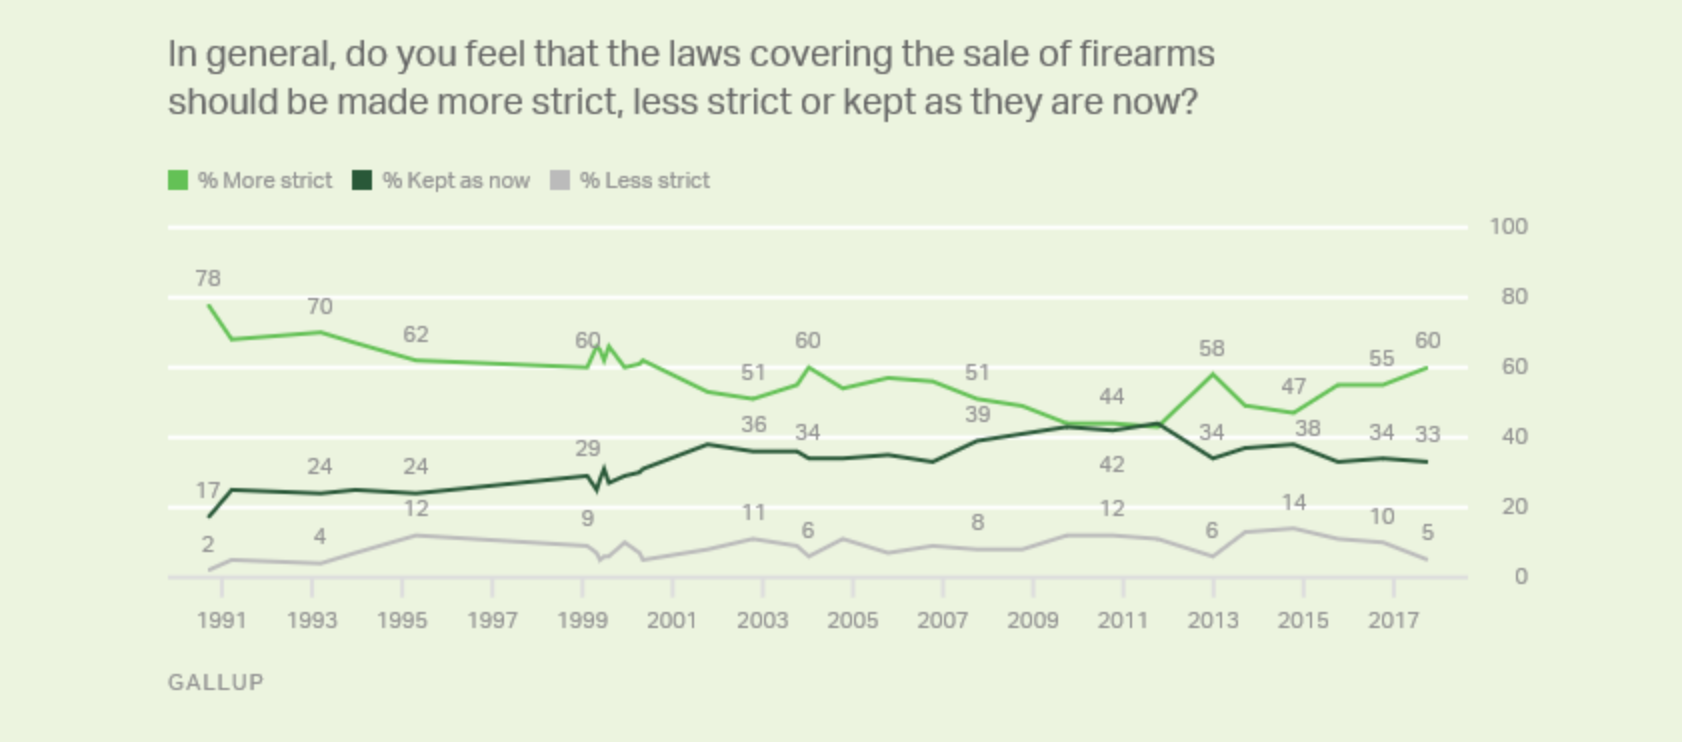 Gallup has been tracking American attitudes about gun control since 1960